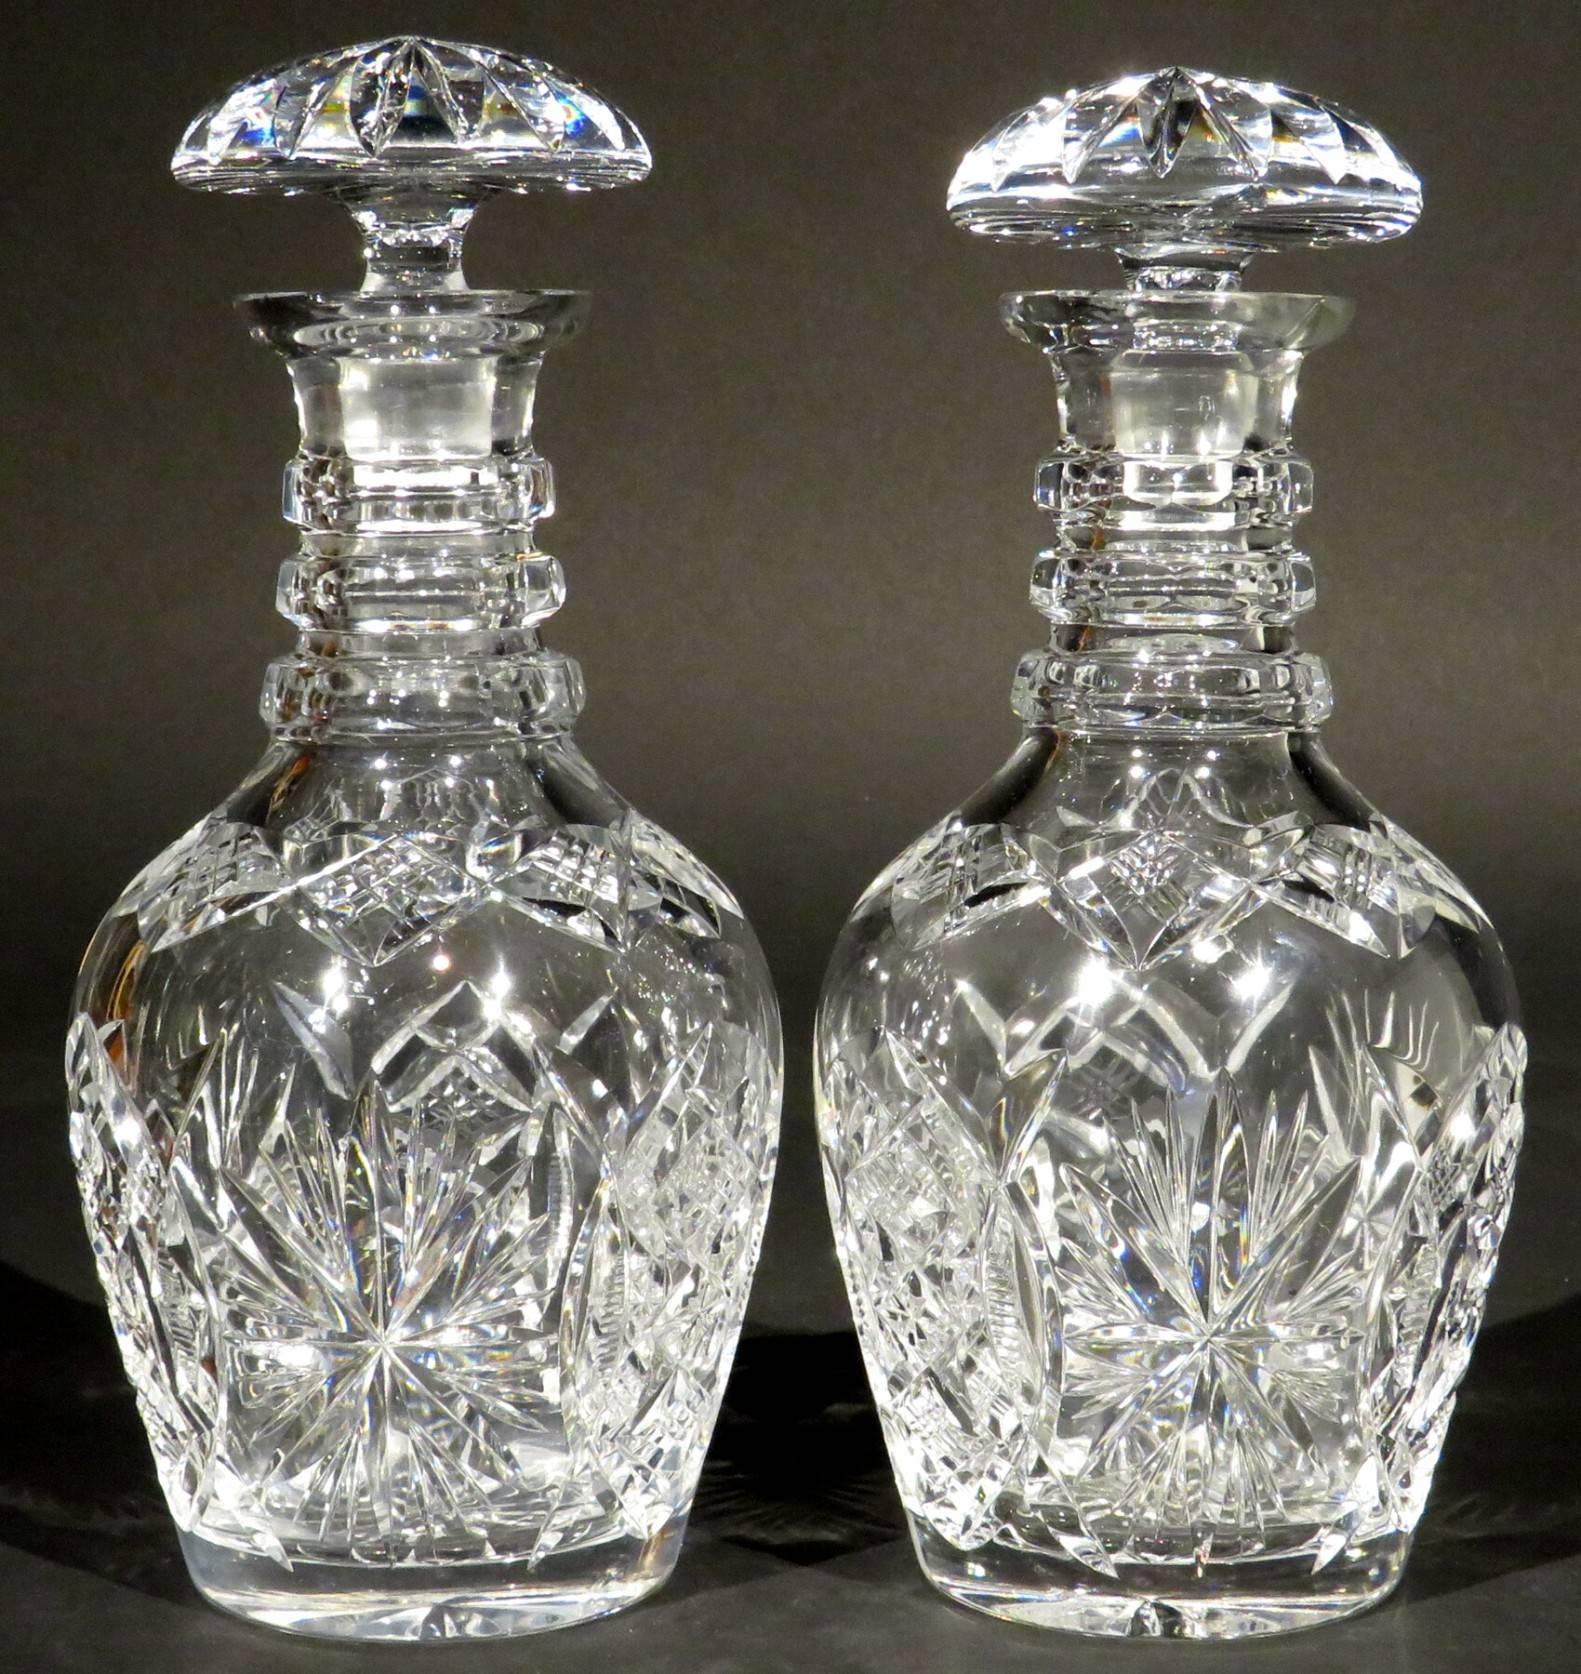 A handsome and robust pair of 19th century cut-glass decanters, both barrel shaped bodies showing deep cut repeating starburst & angular faceted motifs, rising to triple-ring necks fitted with star-cut mushroom stoppers, their undersides decorated